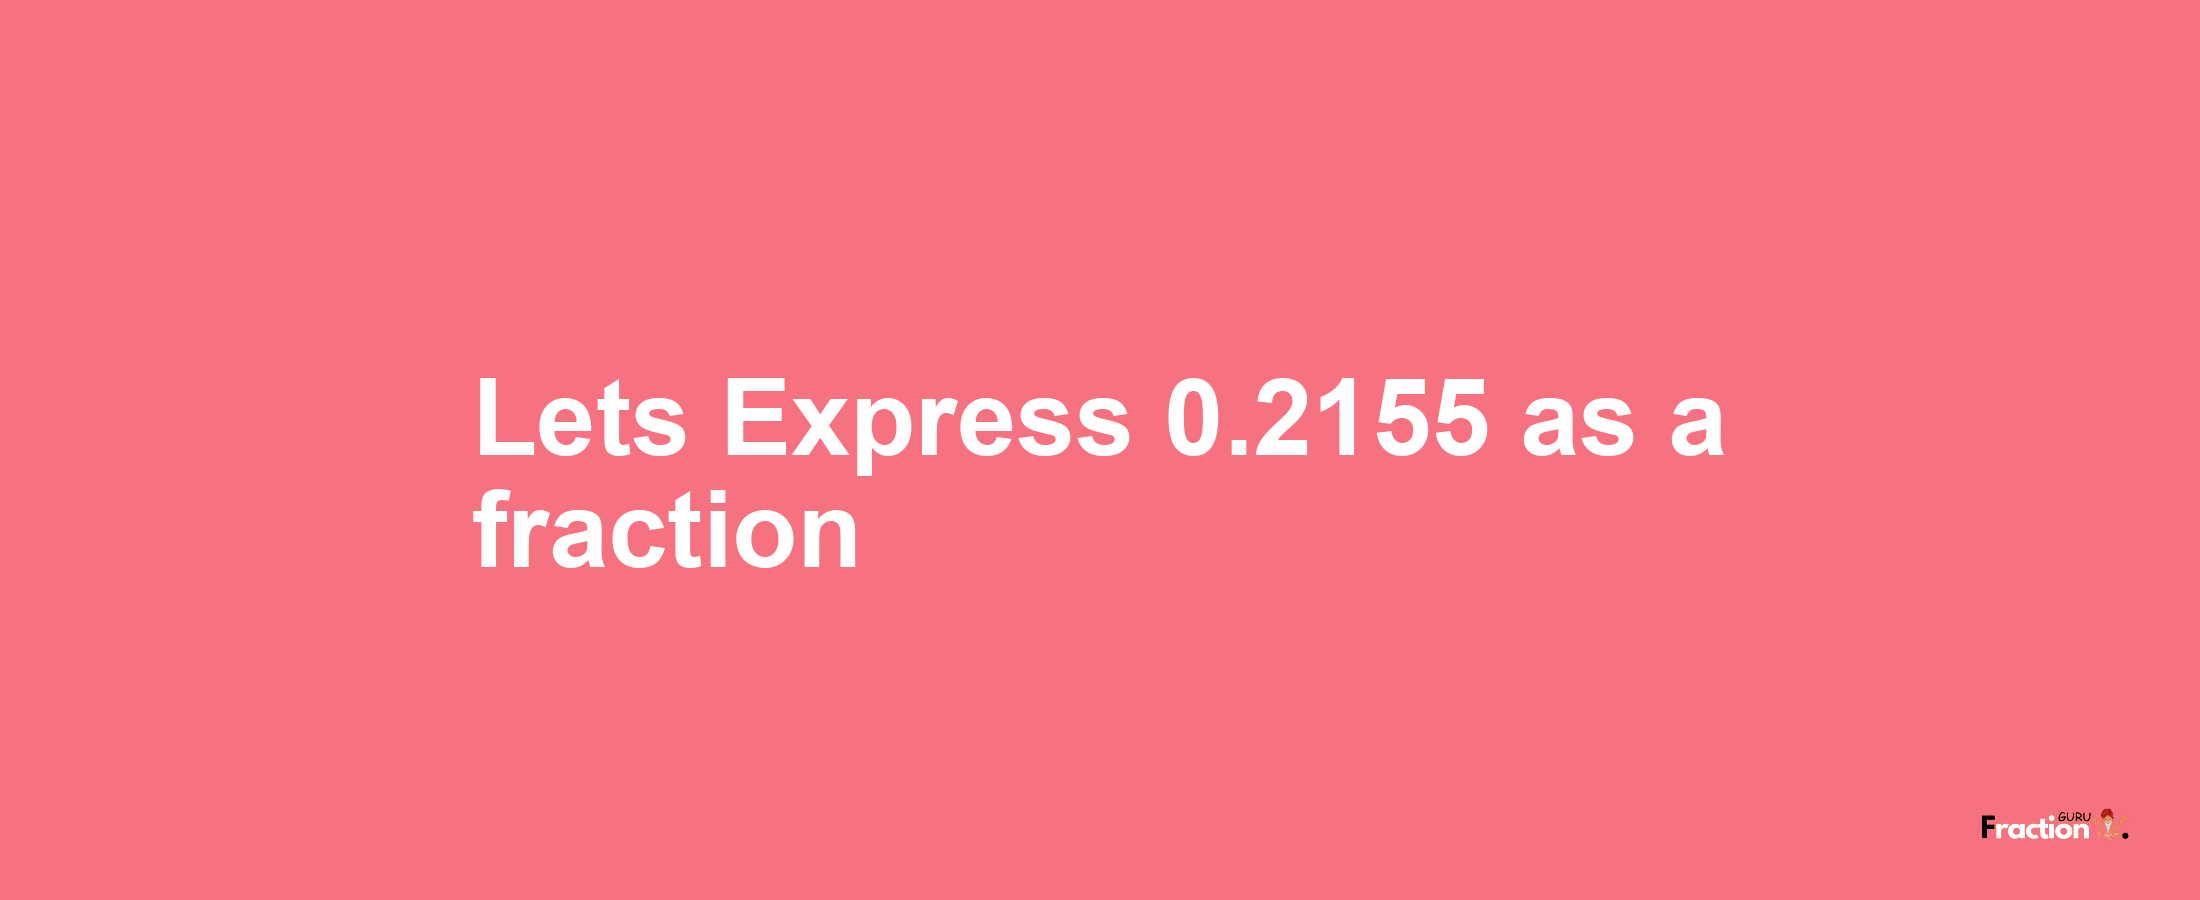 Lets Express 0.2155 as afraction